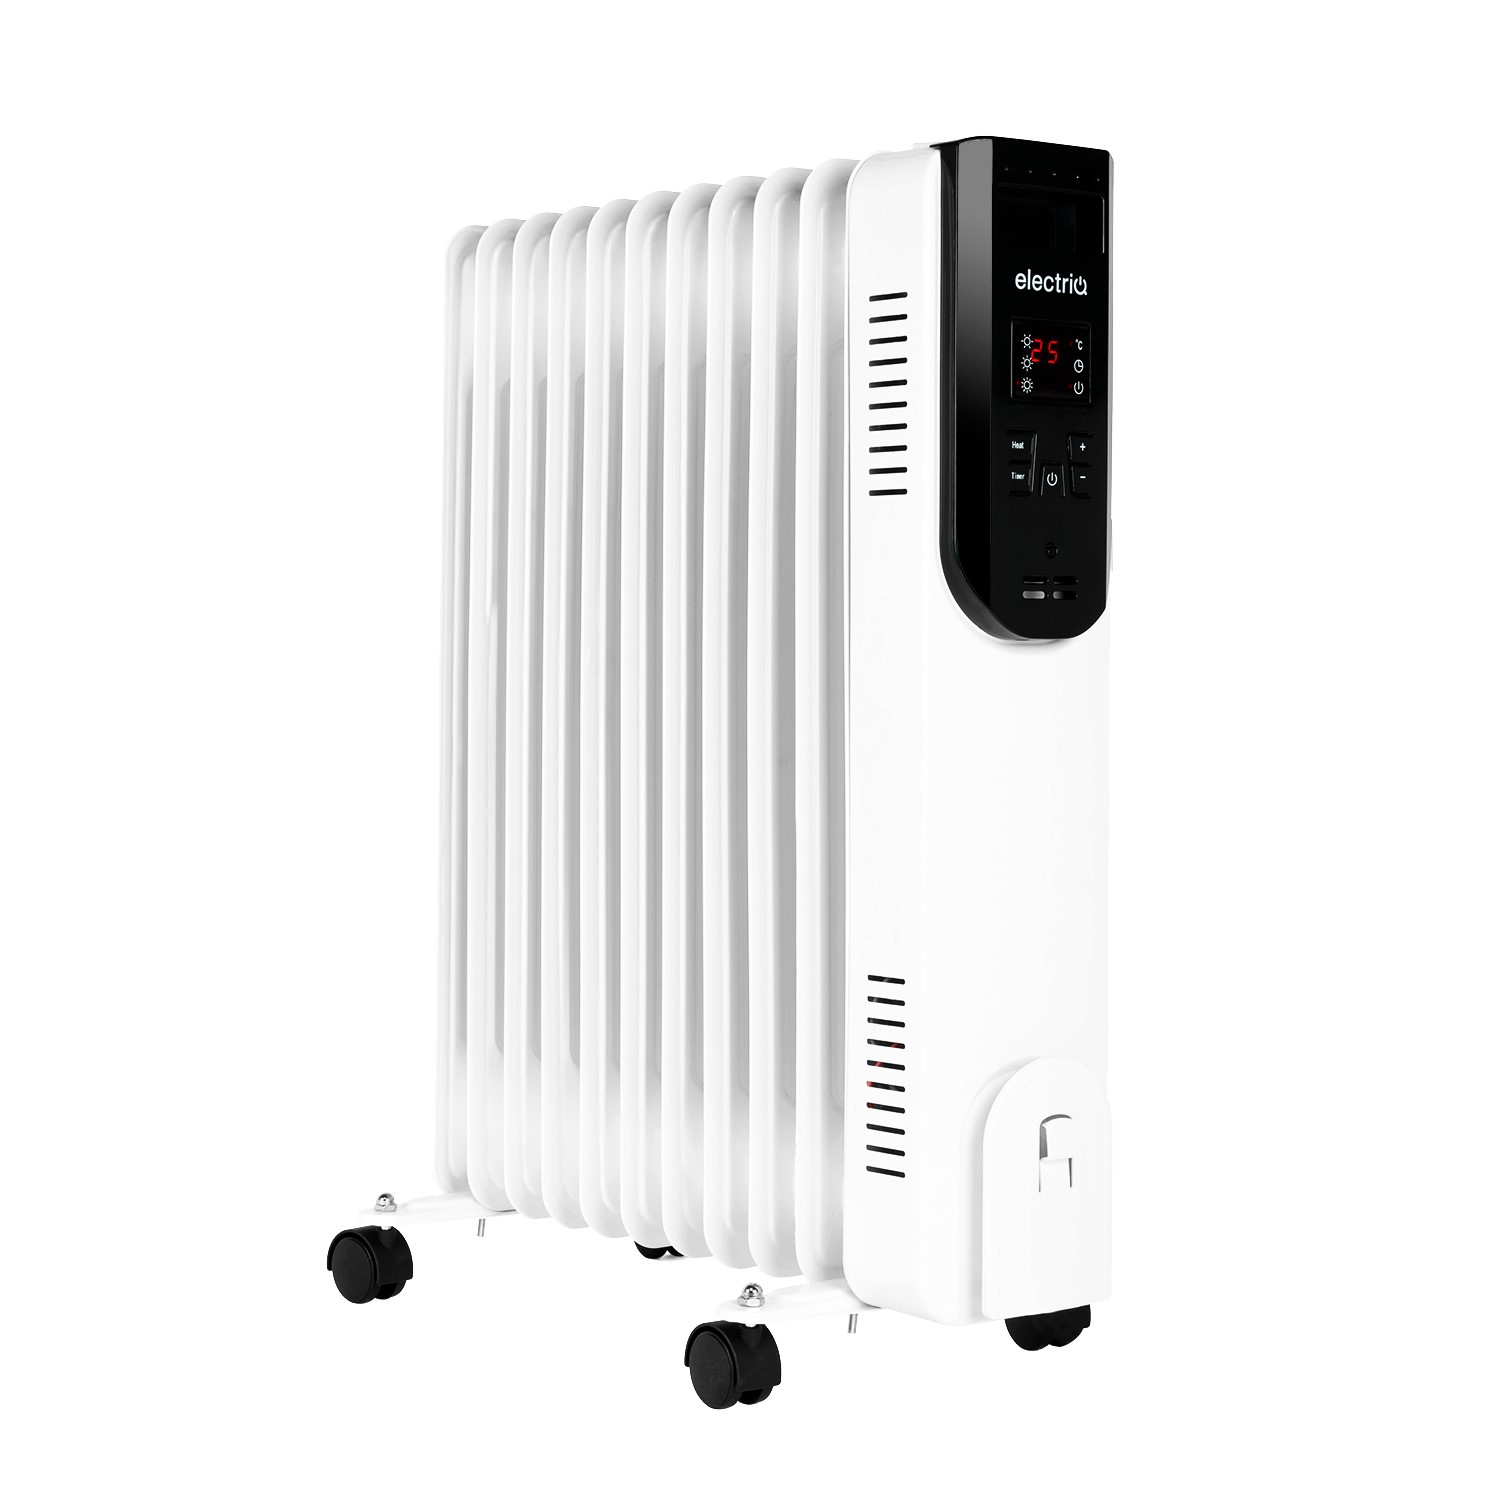 electriQ 2.5kw Smart WiFi Alexa Oil Filled Radiator 11 Fin 24 hour and Weekly Timer with Thermostat 